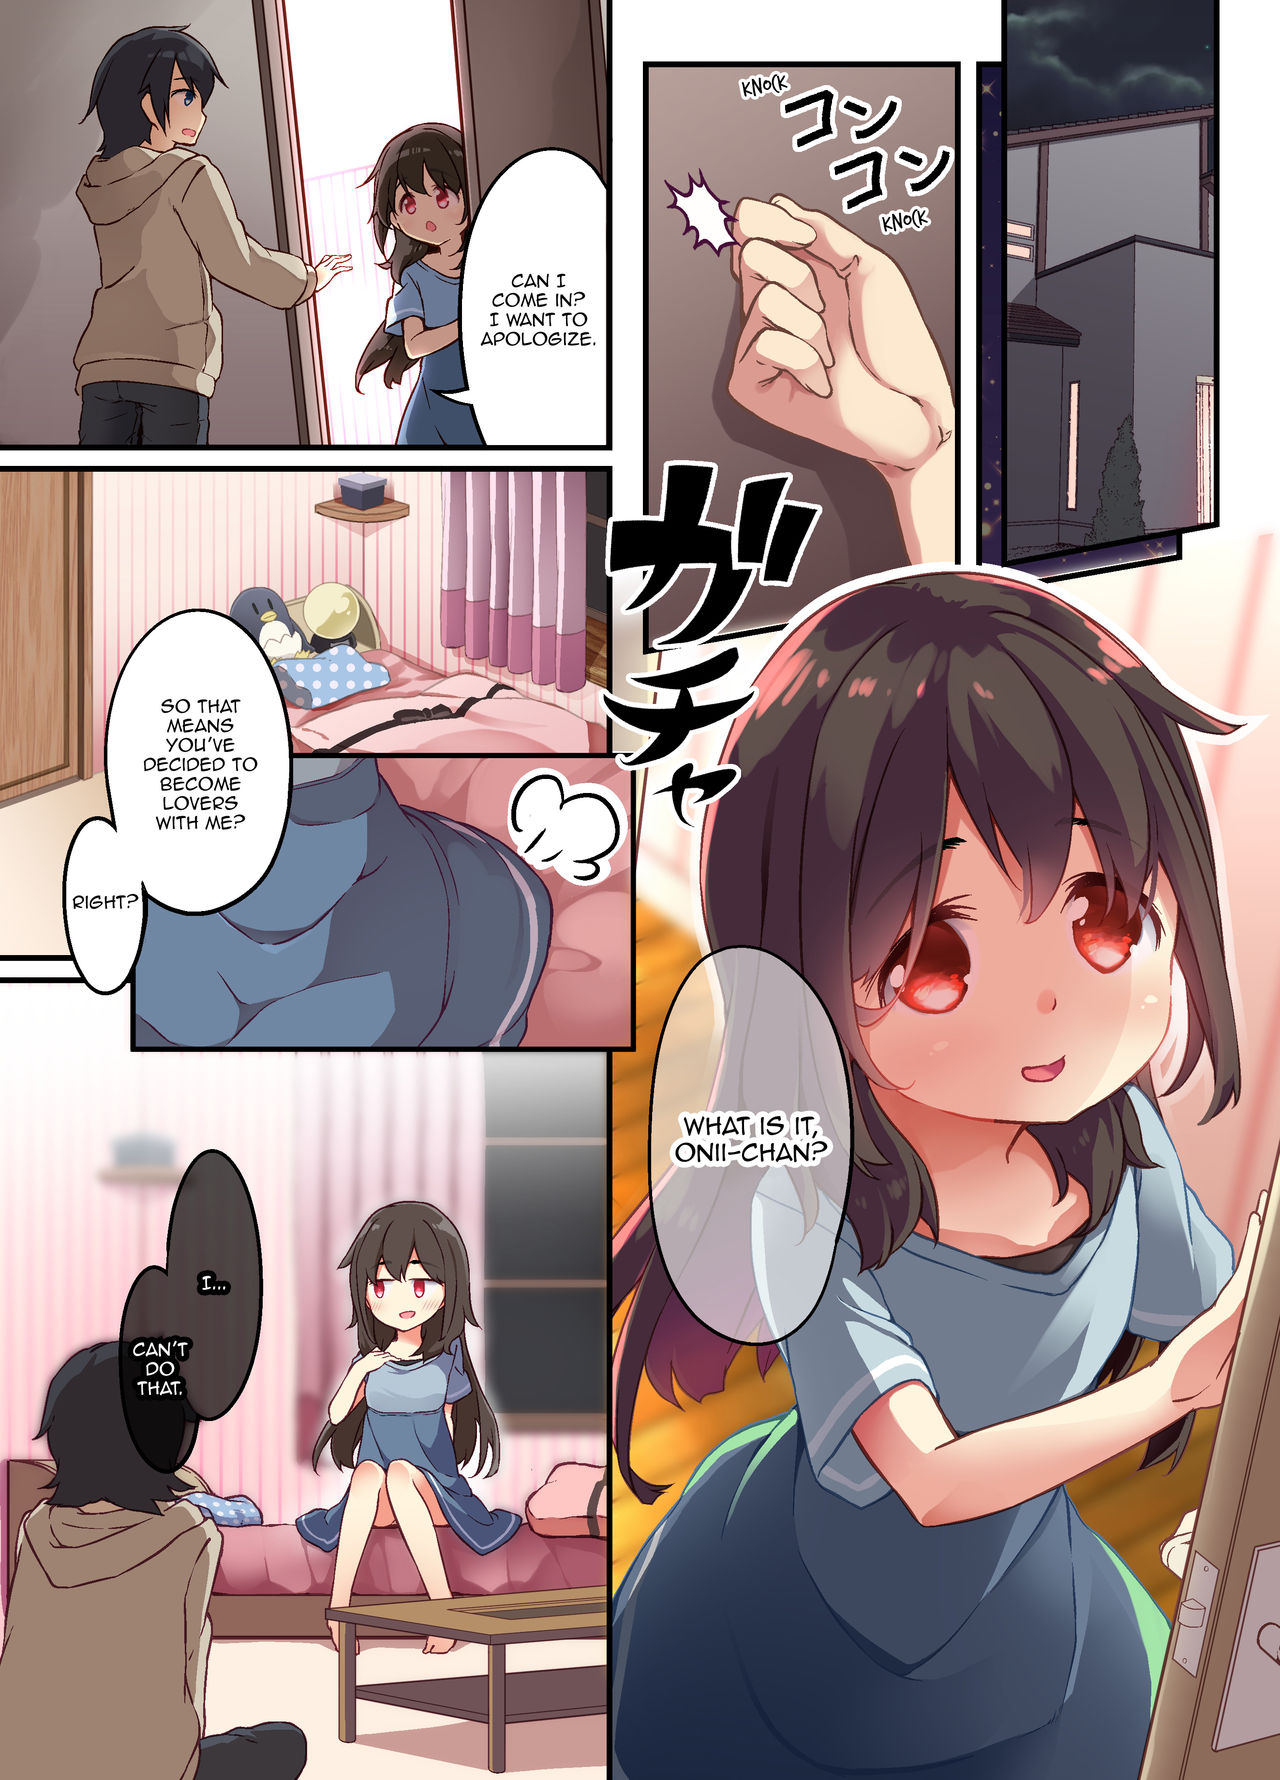 Big Brother And Sister Cartoon Porn - A Yandere Little Sister Wants to Be Impregnated by Her Big Brother, So She  Switches Bodies With Him and They Have Baby-Making Sex - Page 6 - HentaiFox